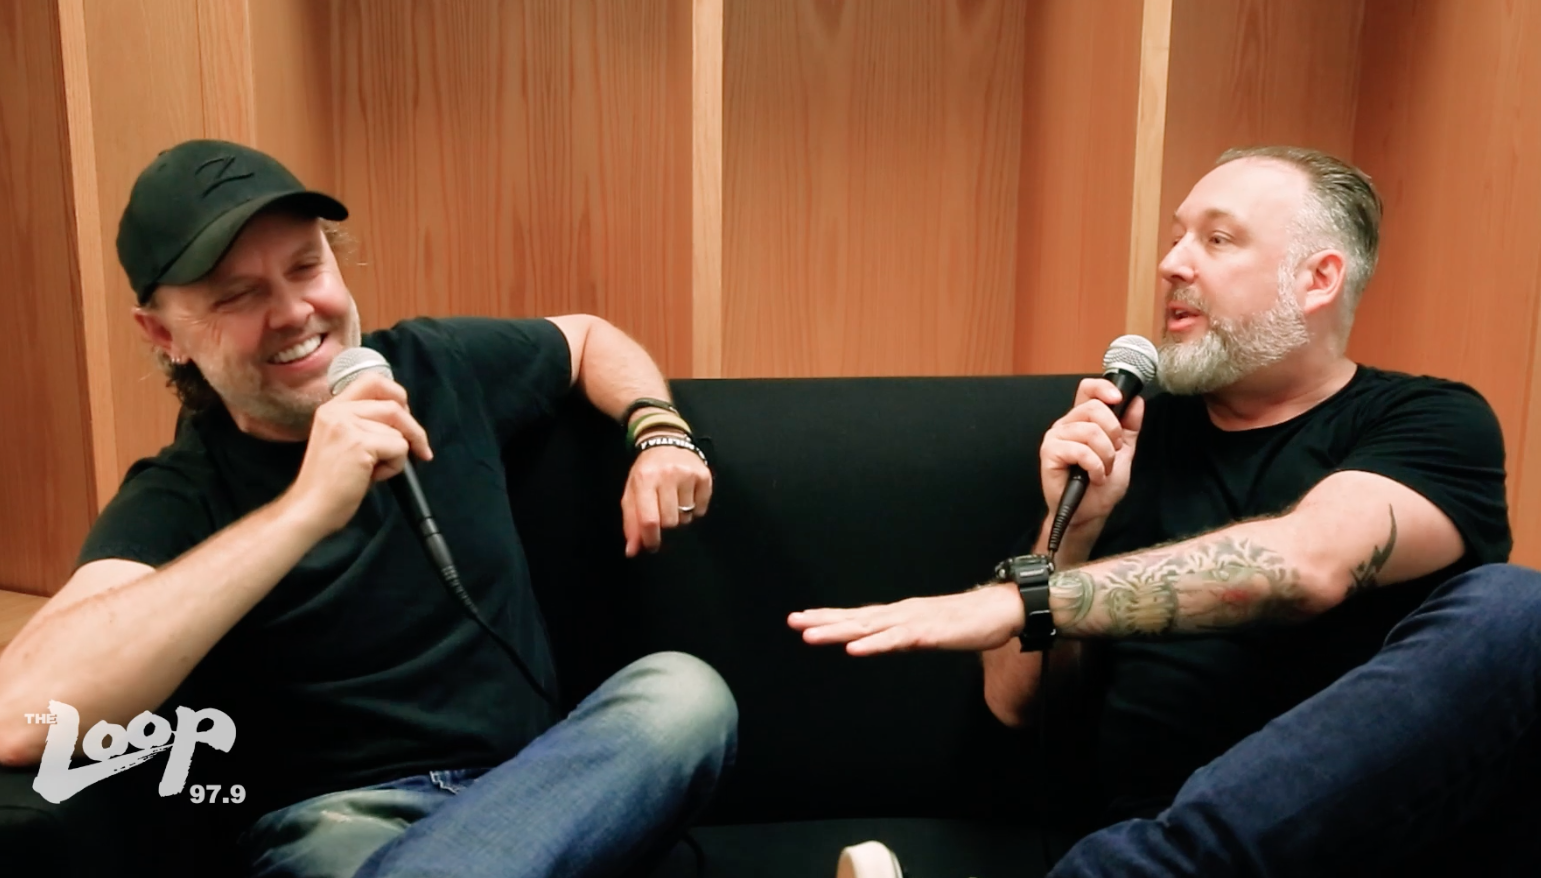 VIDEO: Metallica backstage with The Loop